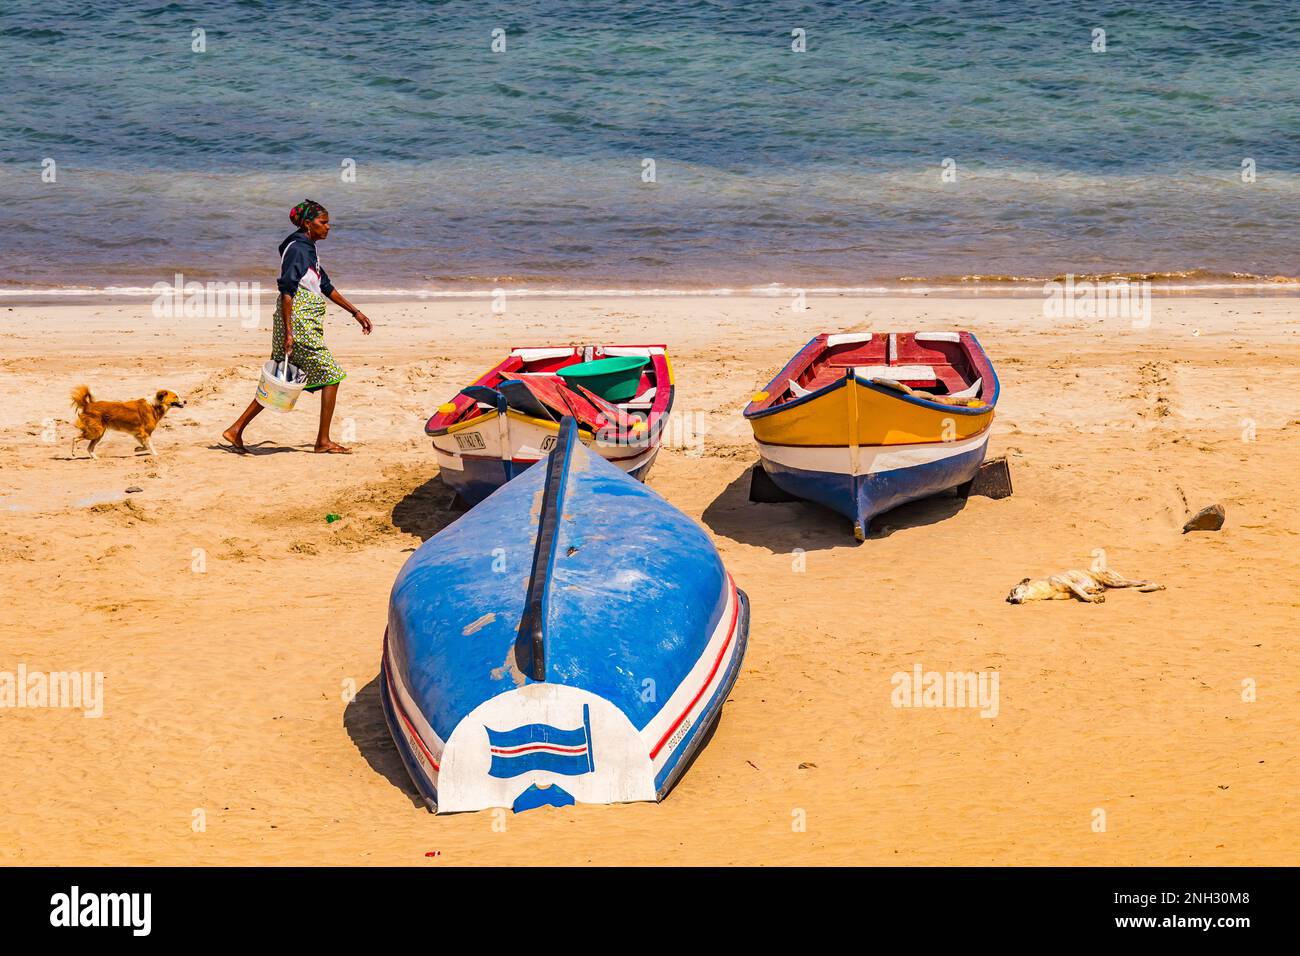 A woman and two dogs next to three small boats on the beach of Tarrafal, Santiago Island, Cape Verde Islands Stock Photo